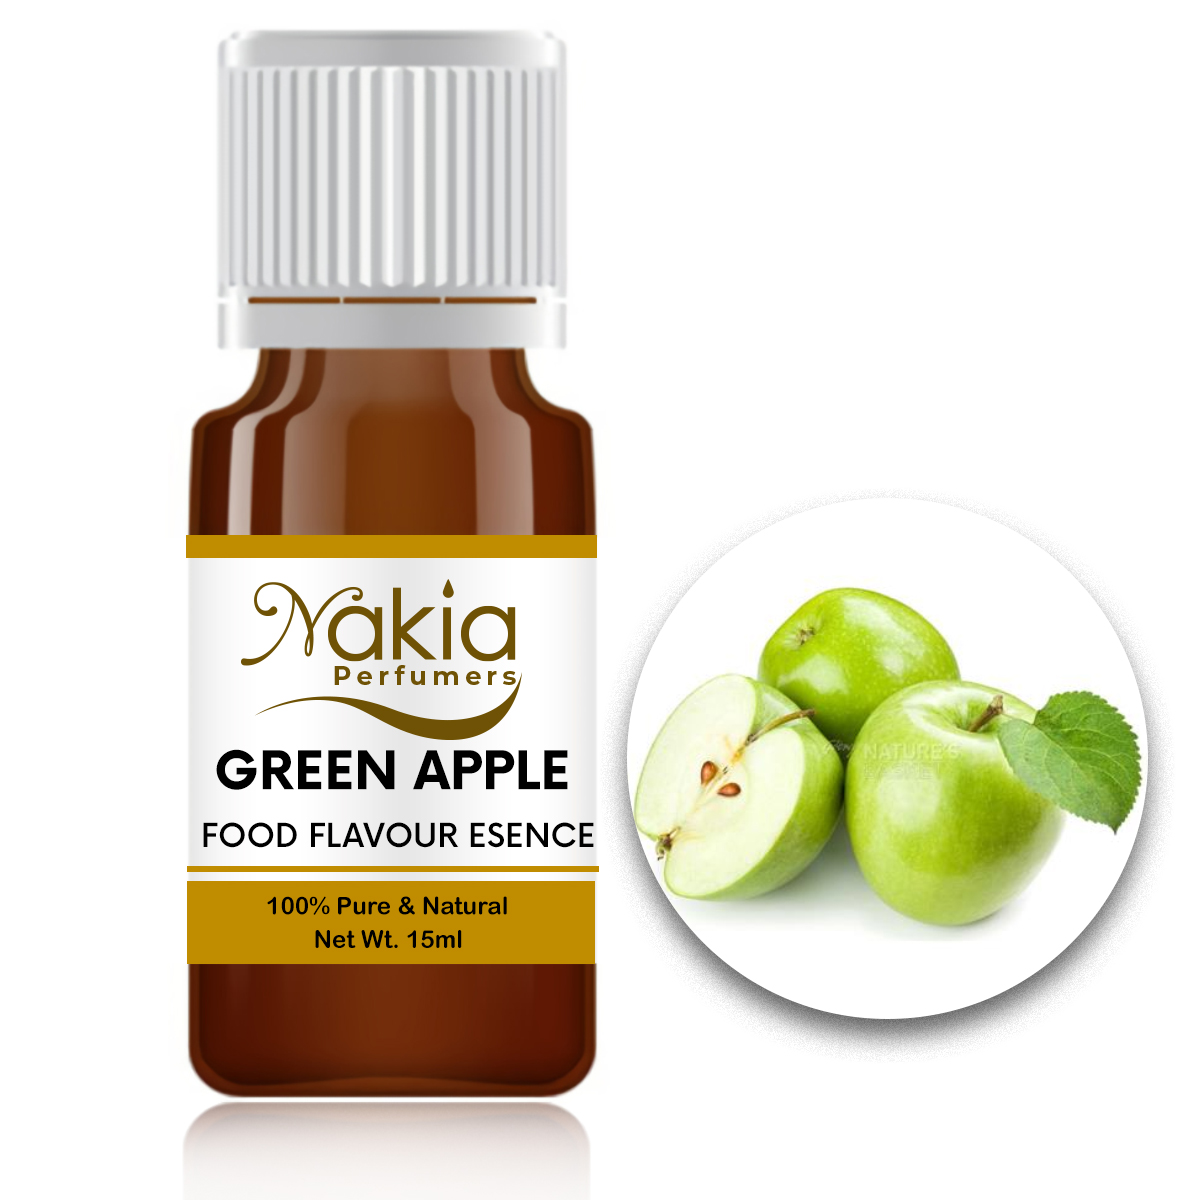 GREEN APPLE FLAVOURING ESSENCE